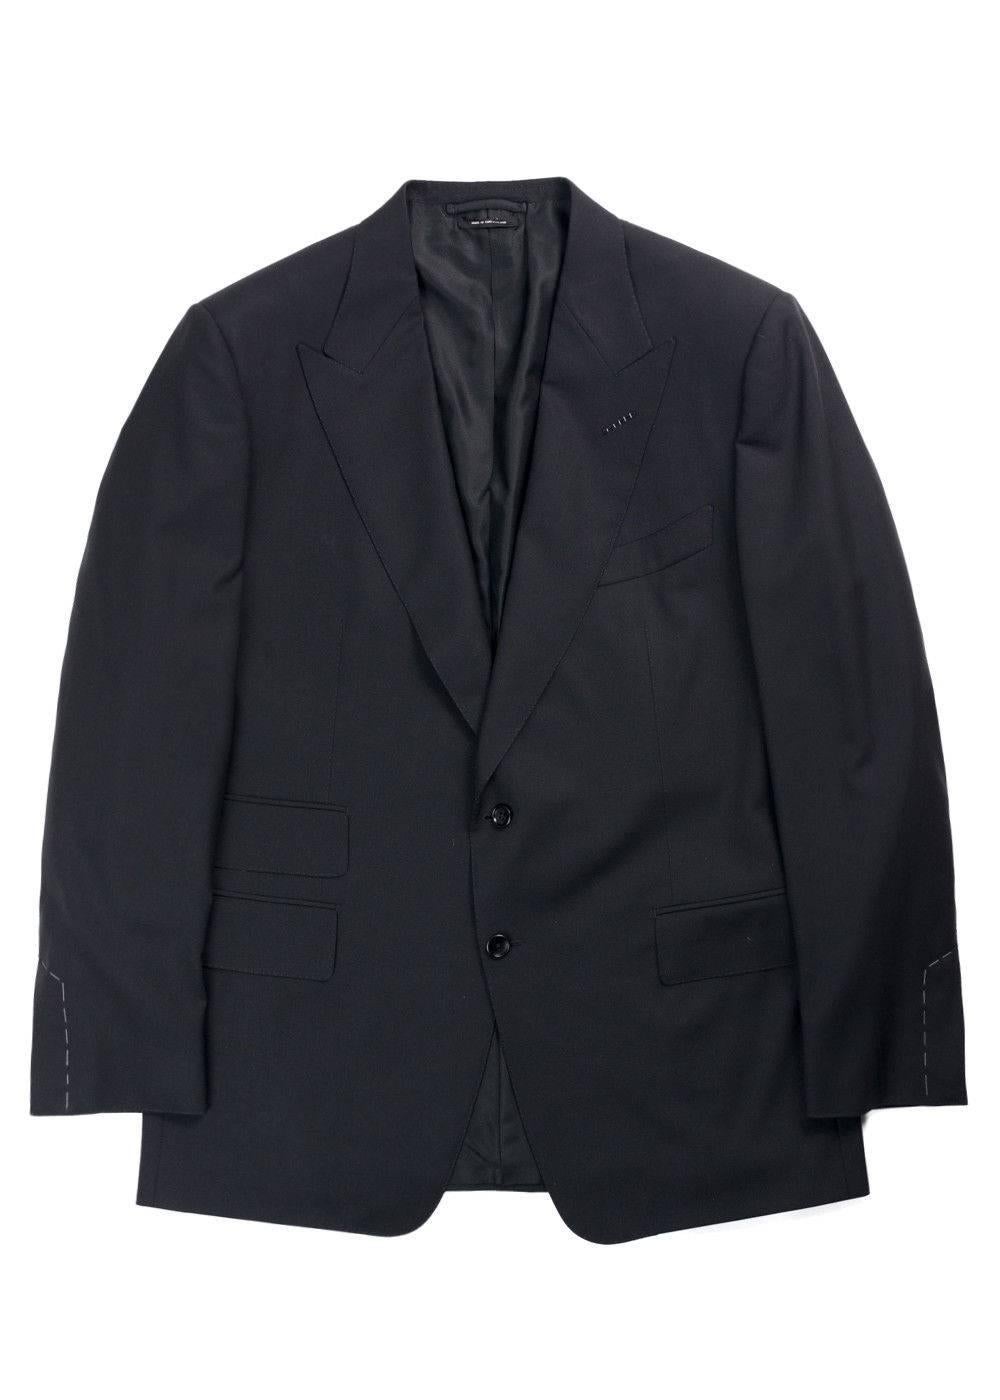 Brand New Tom Ford Windsor 3 Piece Suit
Original Tags & Hanger Included
Retails in Stores & Online for $3960
Size EUR 52R / US 42 Fits True to Size

Lend a hint of effortless sophistication to your formal repertoire courtesy of Tom Ford's